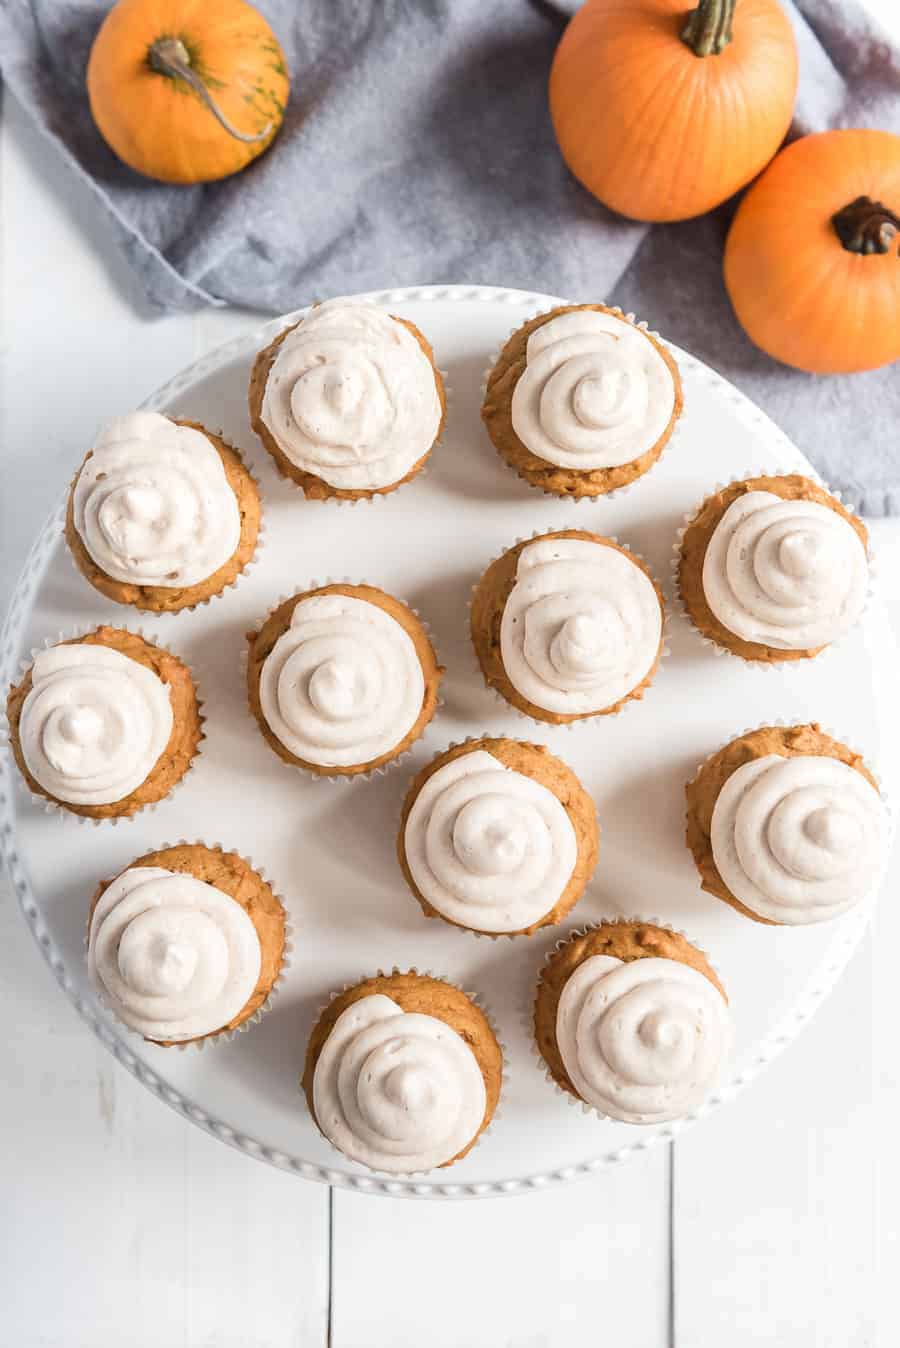 Pumpkin cupcakes with whipped cinnamon icing are perfect bites of fall-inspired sweetness, with just the right amount of pumpkin flavor and warm spices to round them out! #pumpkincupcakes #cupcakerecipe #fallrecipes #pumpkinrecipes #cinnamonfrosting #cupcakes 